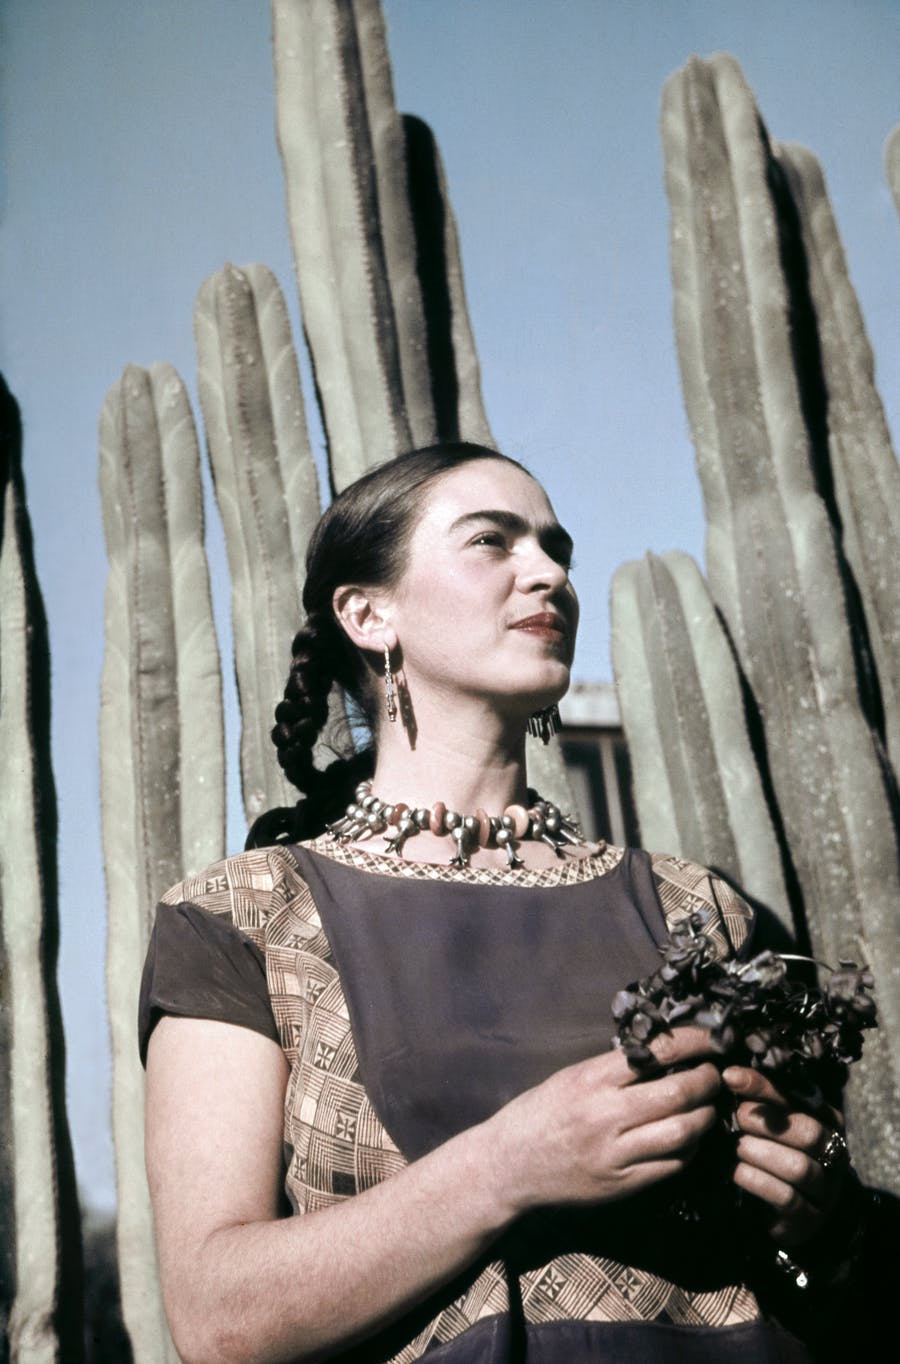 The artist Frida Kahlo at her home, designed by architect Juan O'Gorman c. 1940 in Colonia San Angel, Mexico City, Mexico. Photo: Ivan Dmitri / Michael Ochs Archives / Getty Images